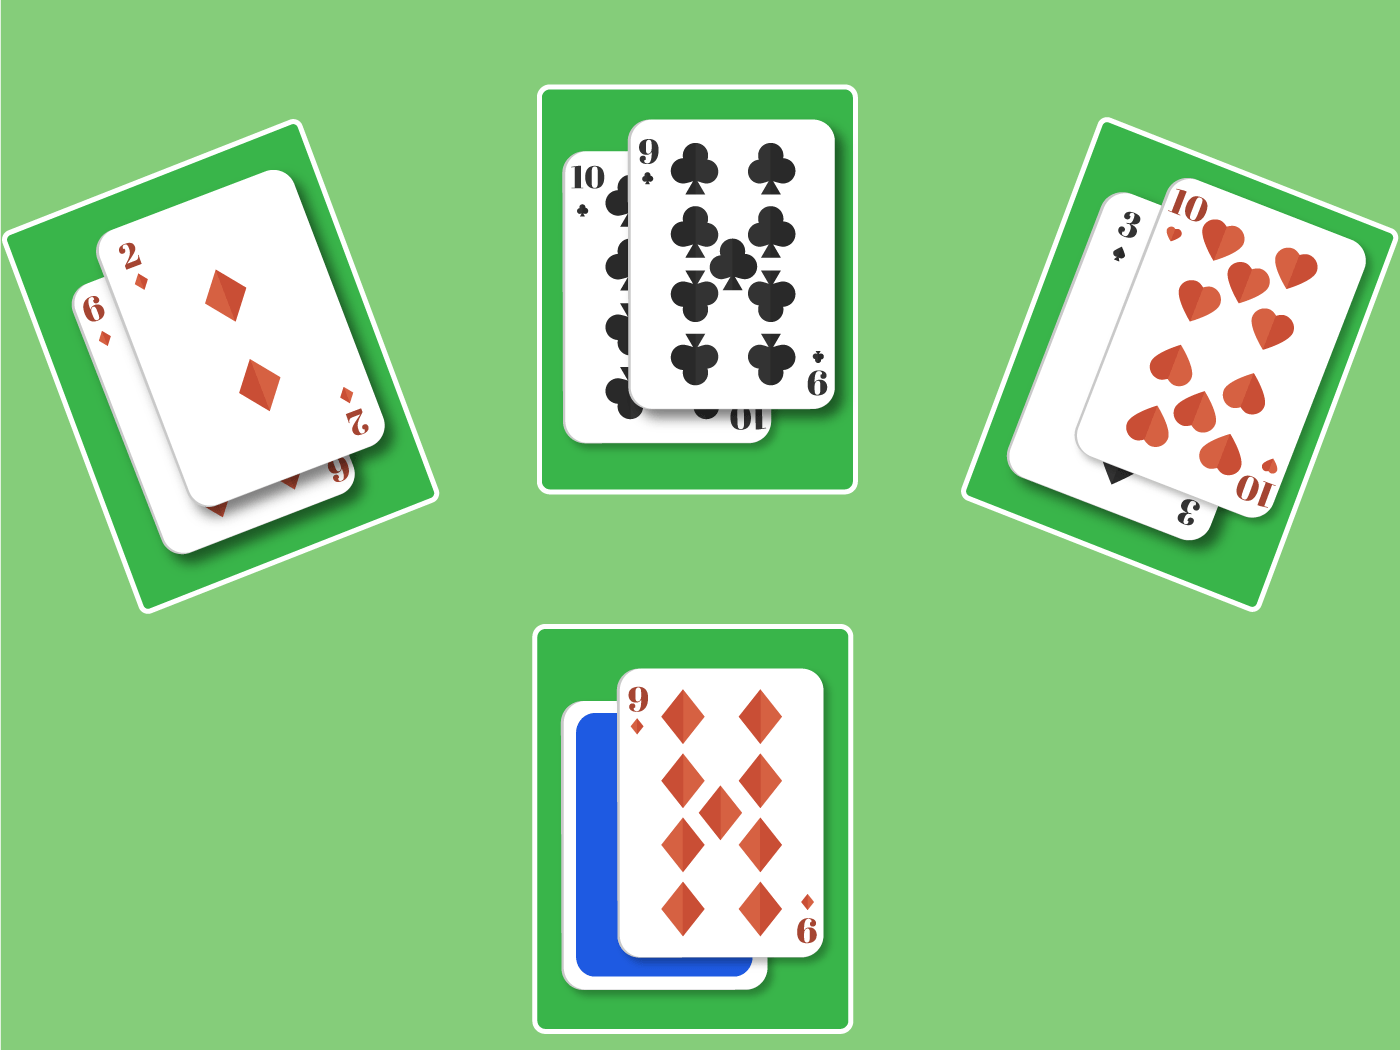 Four hands in blackjack with face up cards